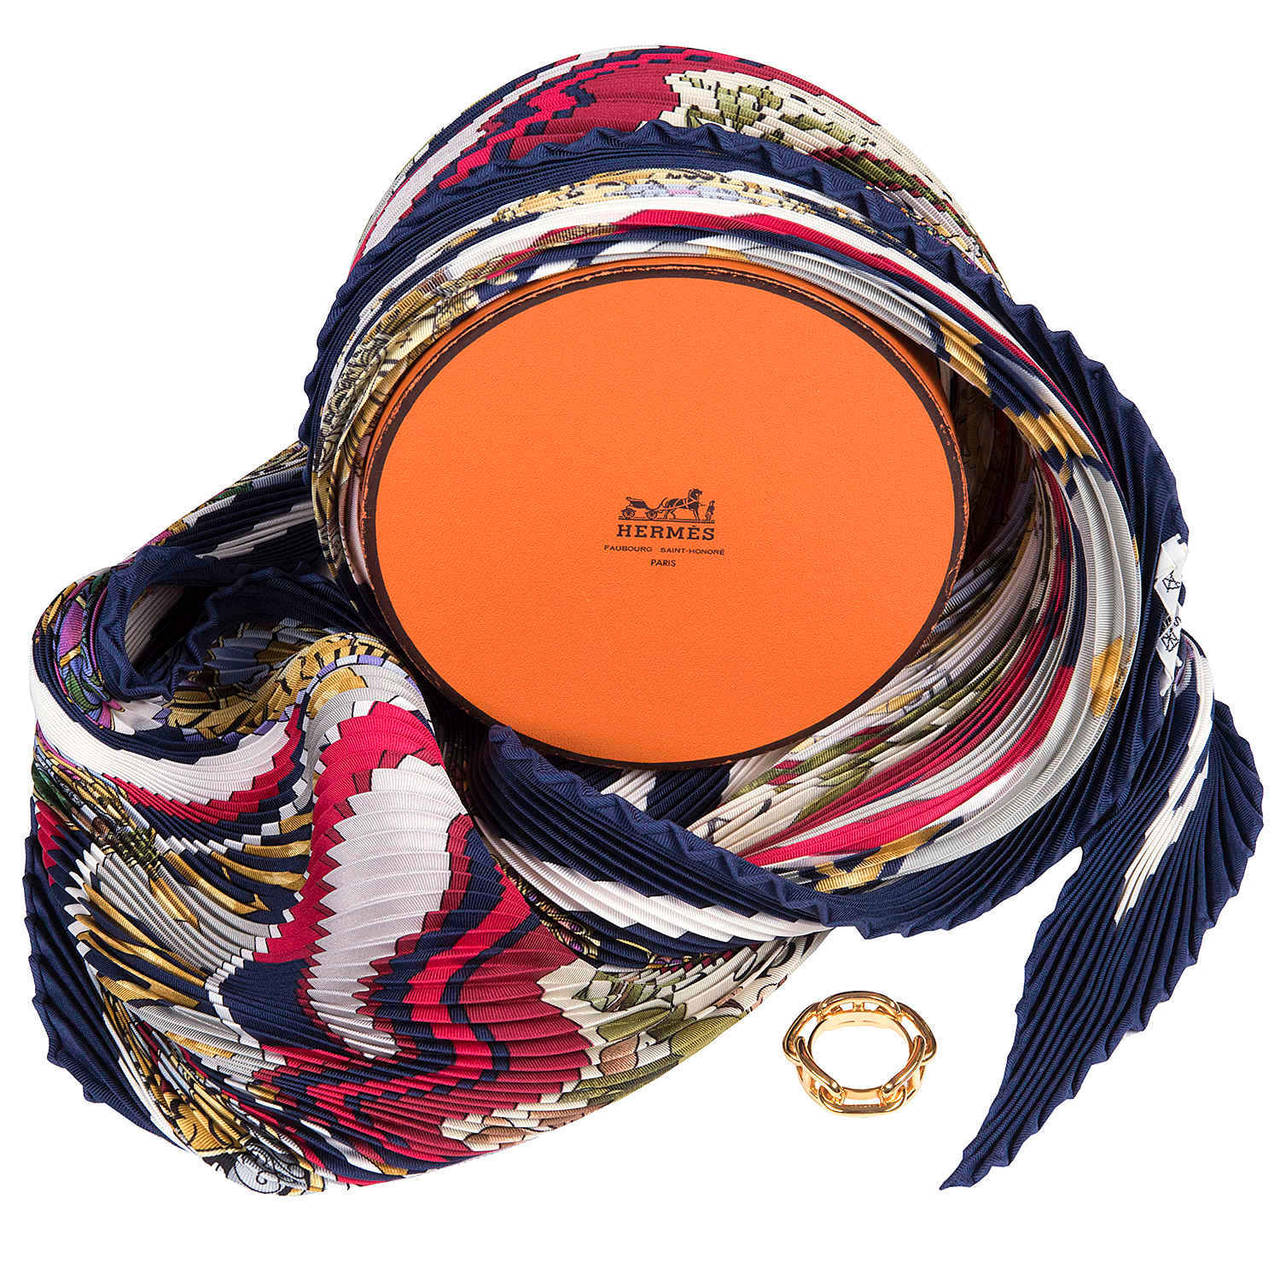 A Rare Hermes Pleated or 'Plisse' Silk Scarf, 'La Ronde des Heures', designed by Loic Dubigeon in 2000 to celebrate the Millennium. In pristine 'store-Fresh' condition, the scarf comes with an Hermes Gold Scarf ring, it's original Hermes circular